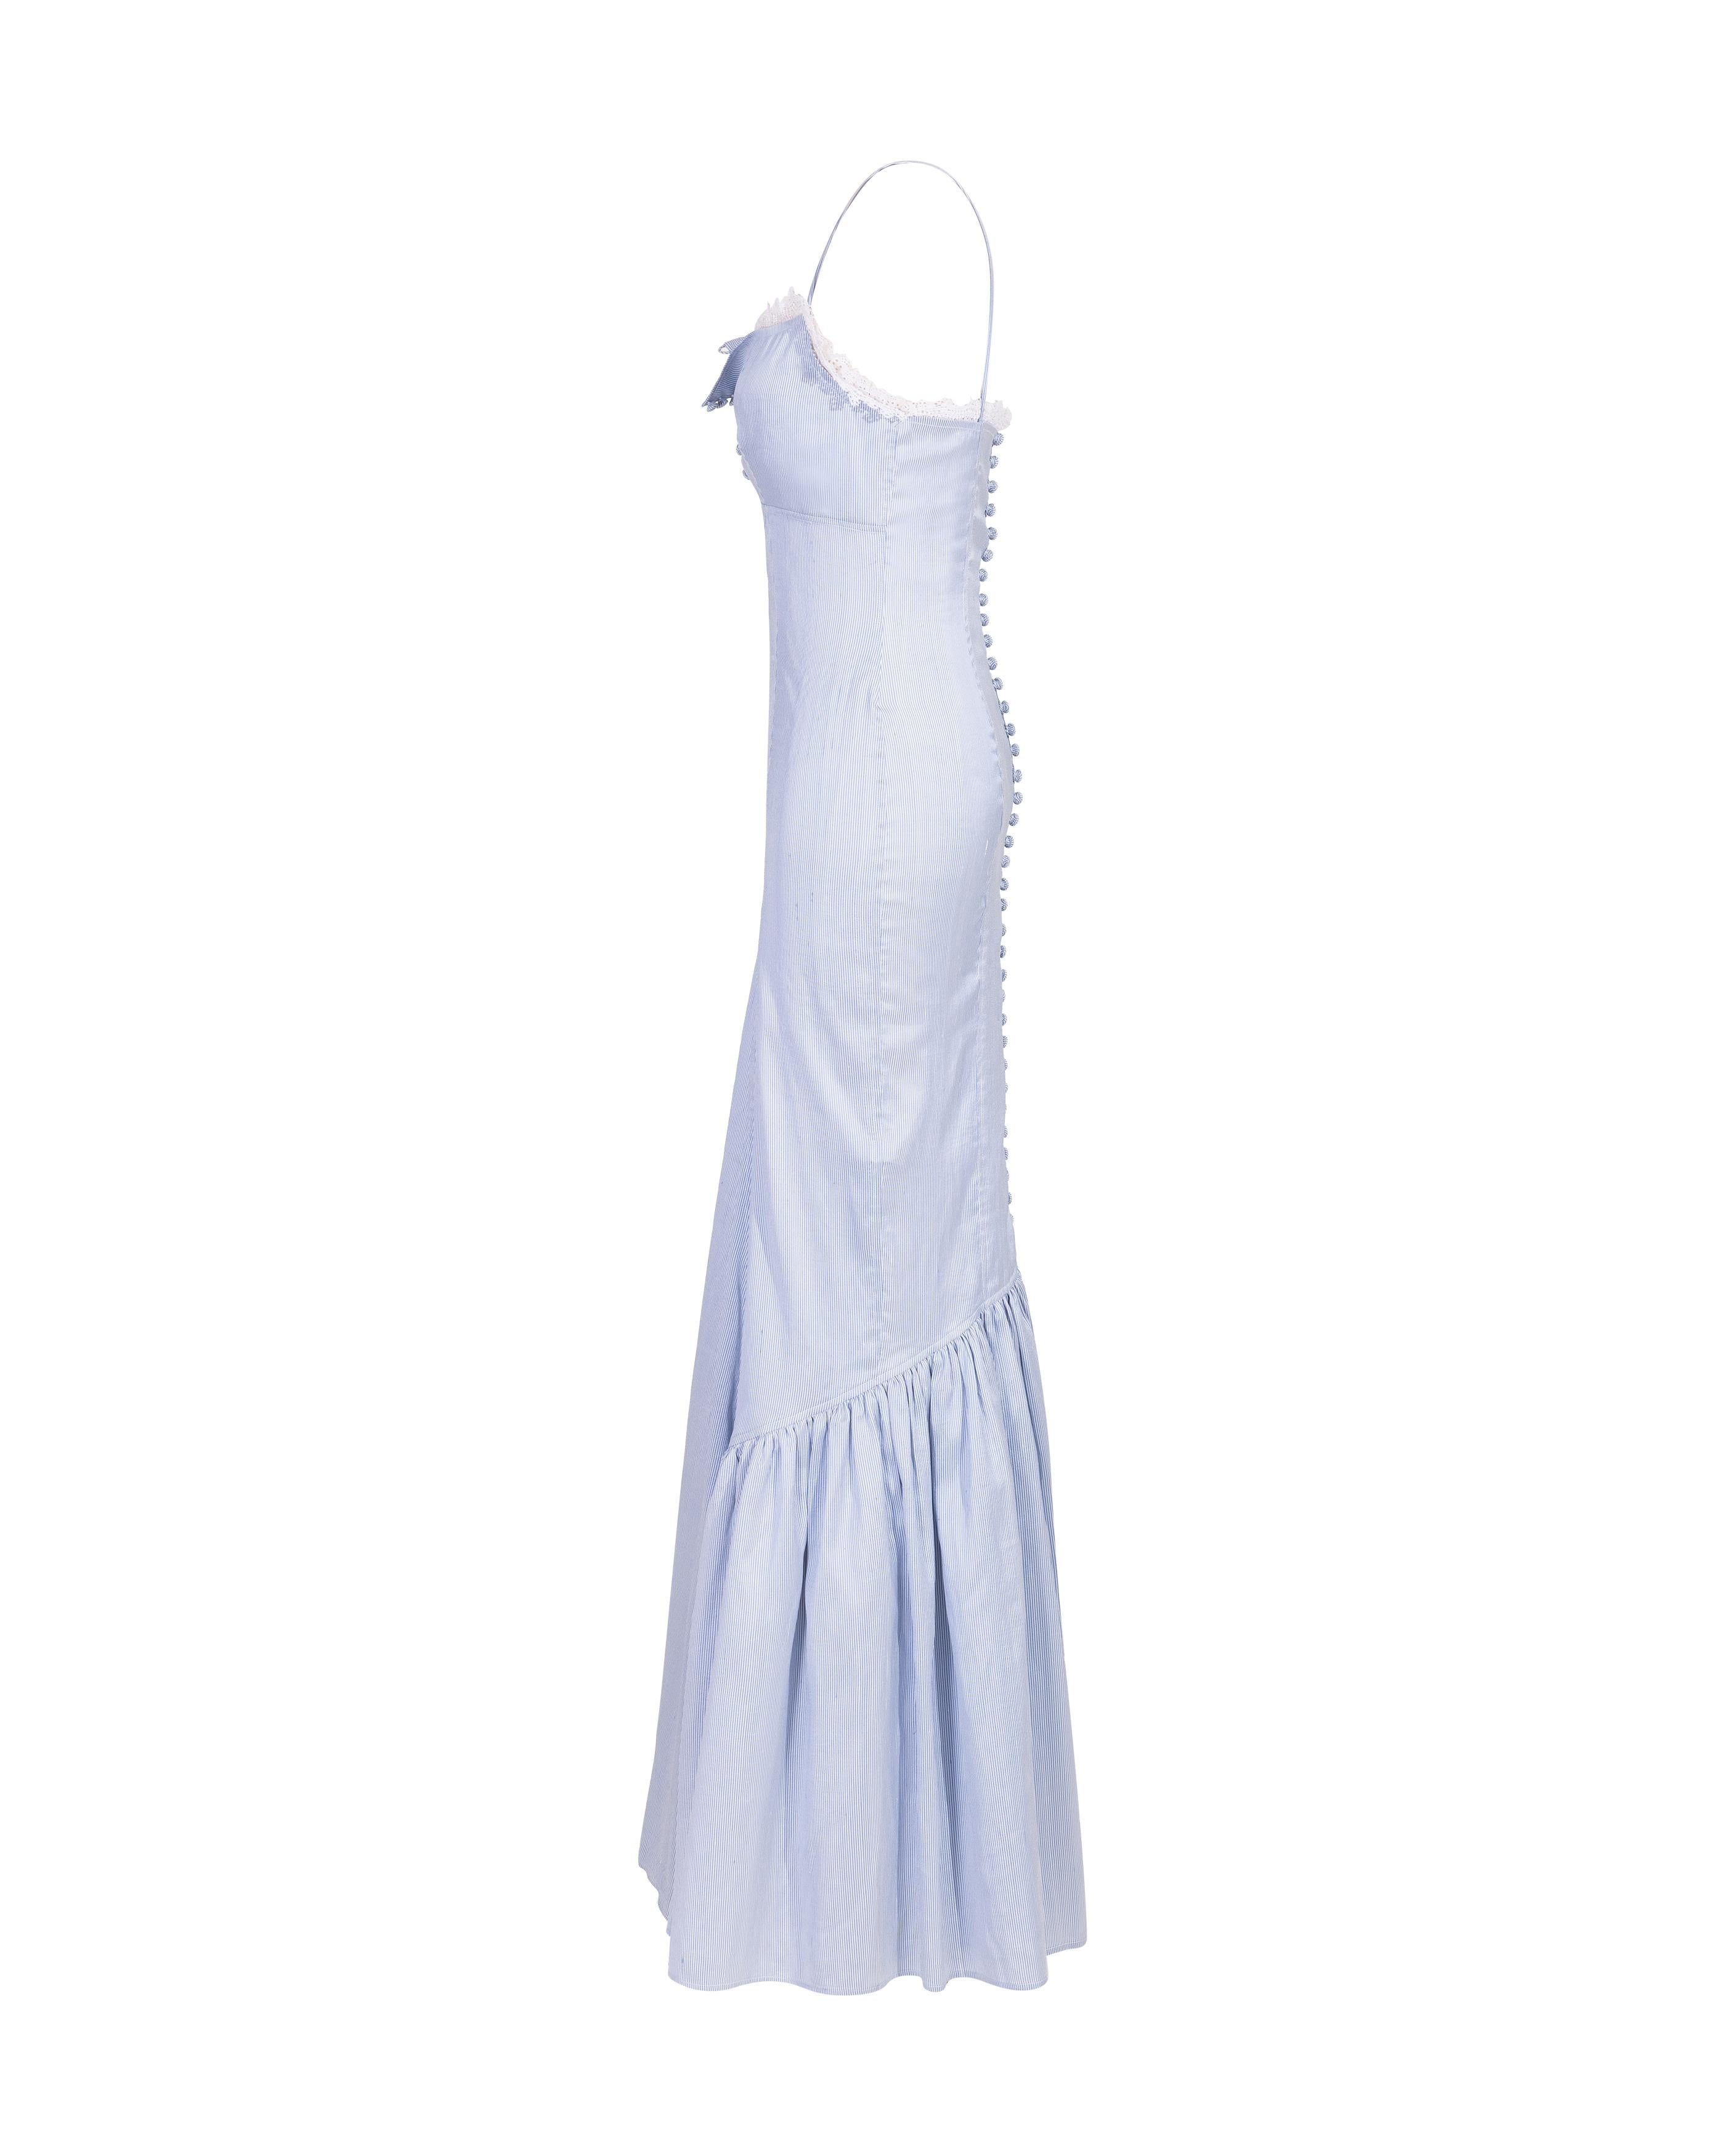 Women's S/S 2006 Ralph Lauren Pinstriped Blue and White Lace Trim Gown